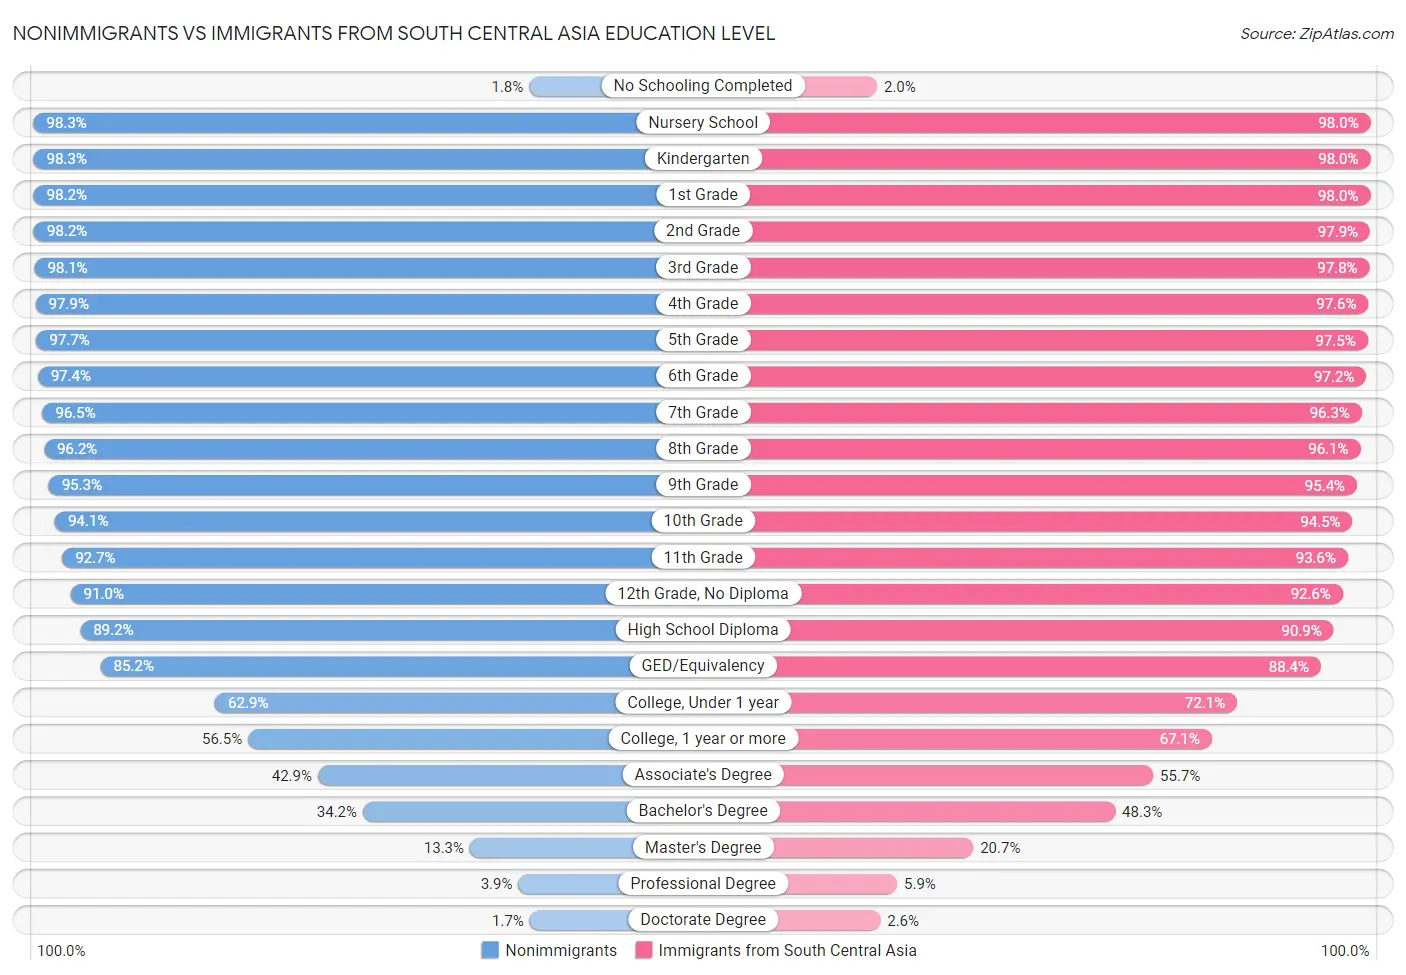 Nonimmigrants vs Immigrants from South Central Asia Education Level